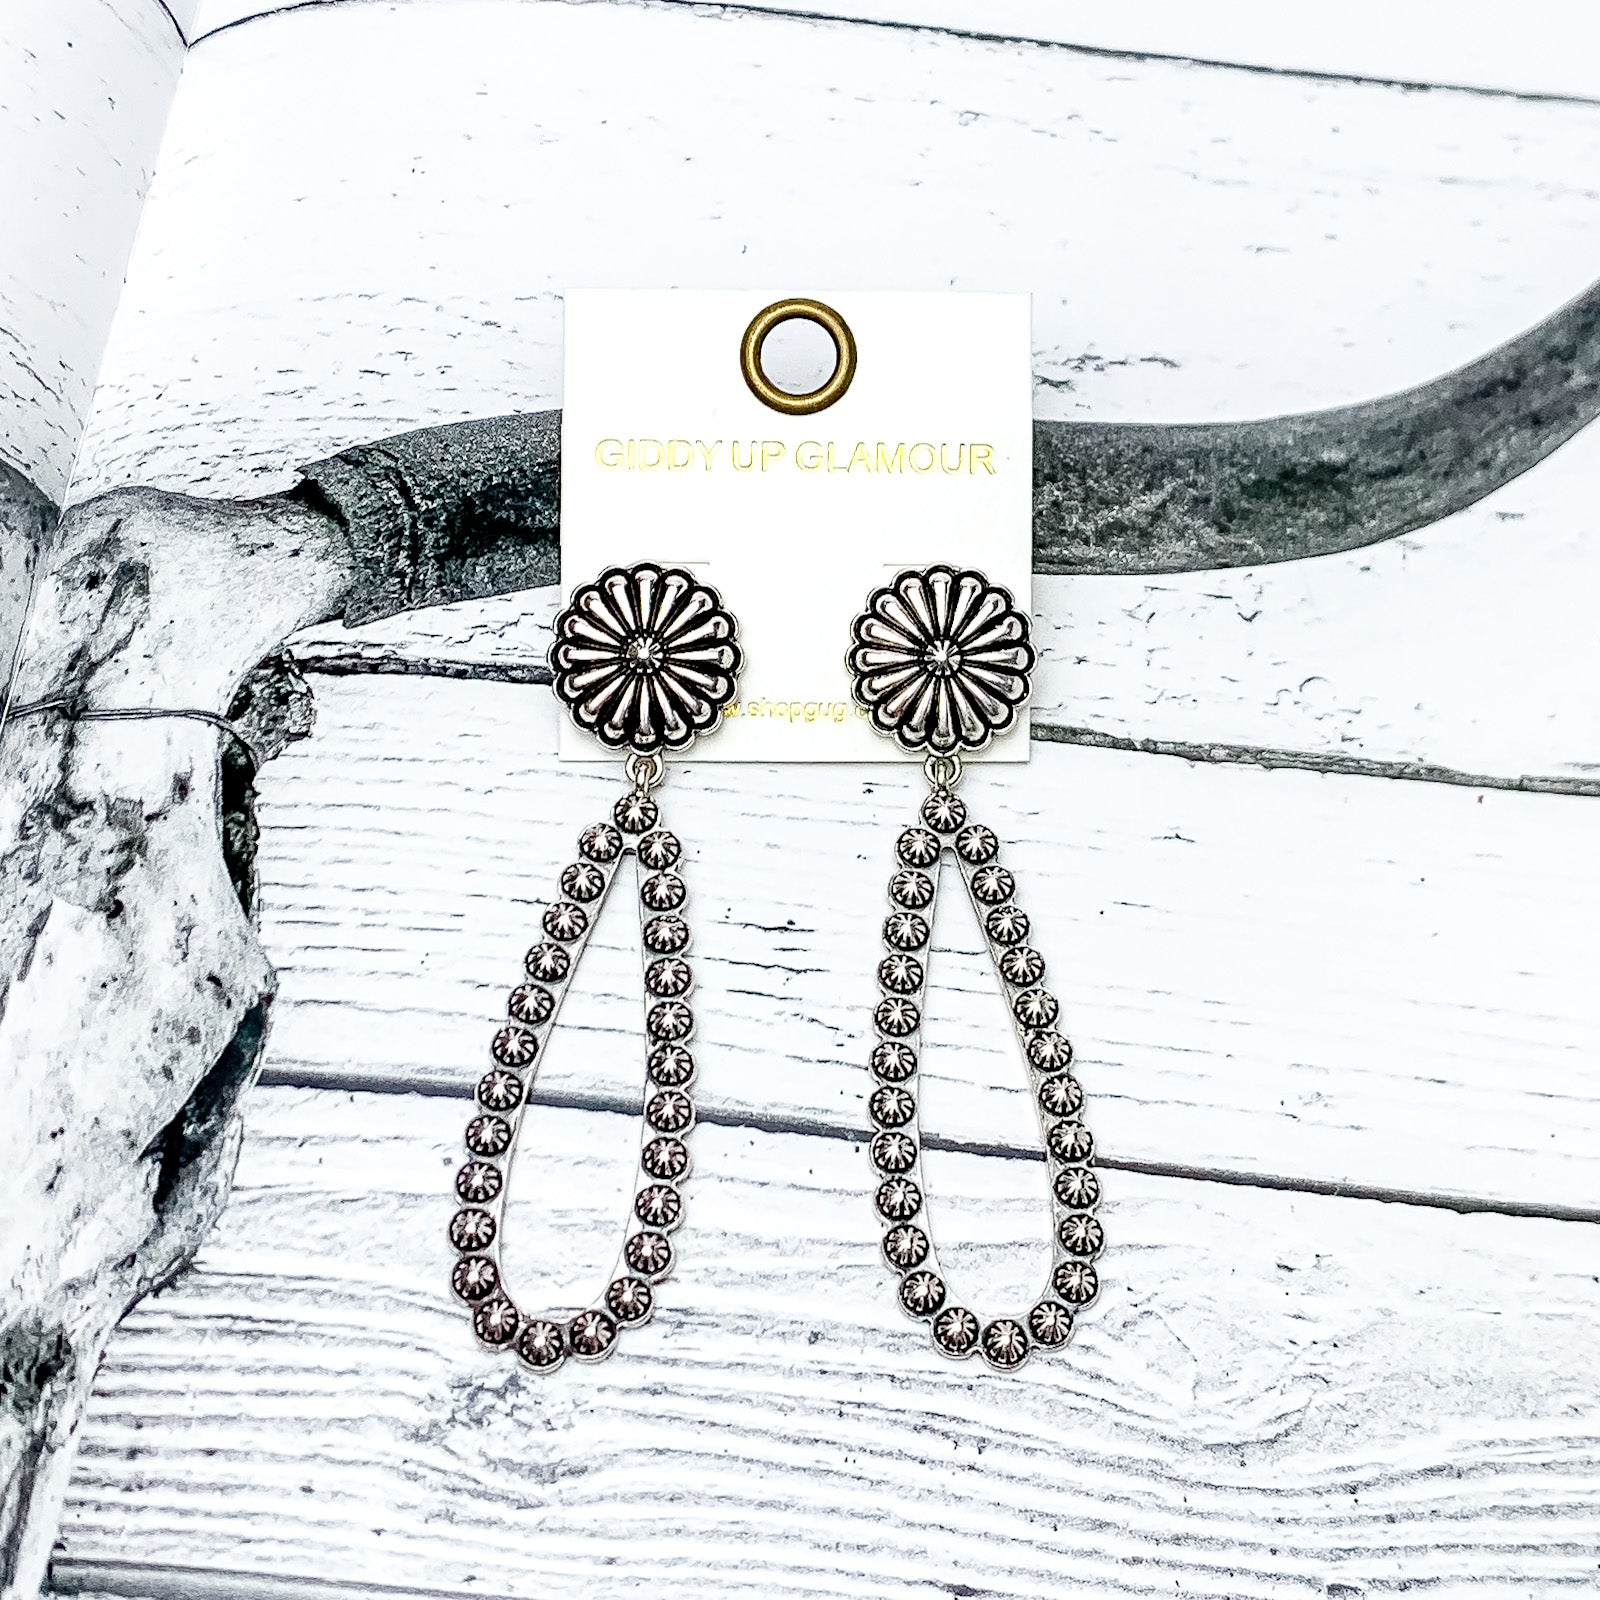 Silver Tone Open Teardrop Earrings With Flower Post. Pictured on a wood like background with a longhorn in the picture.